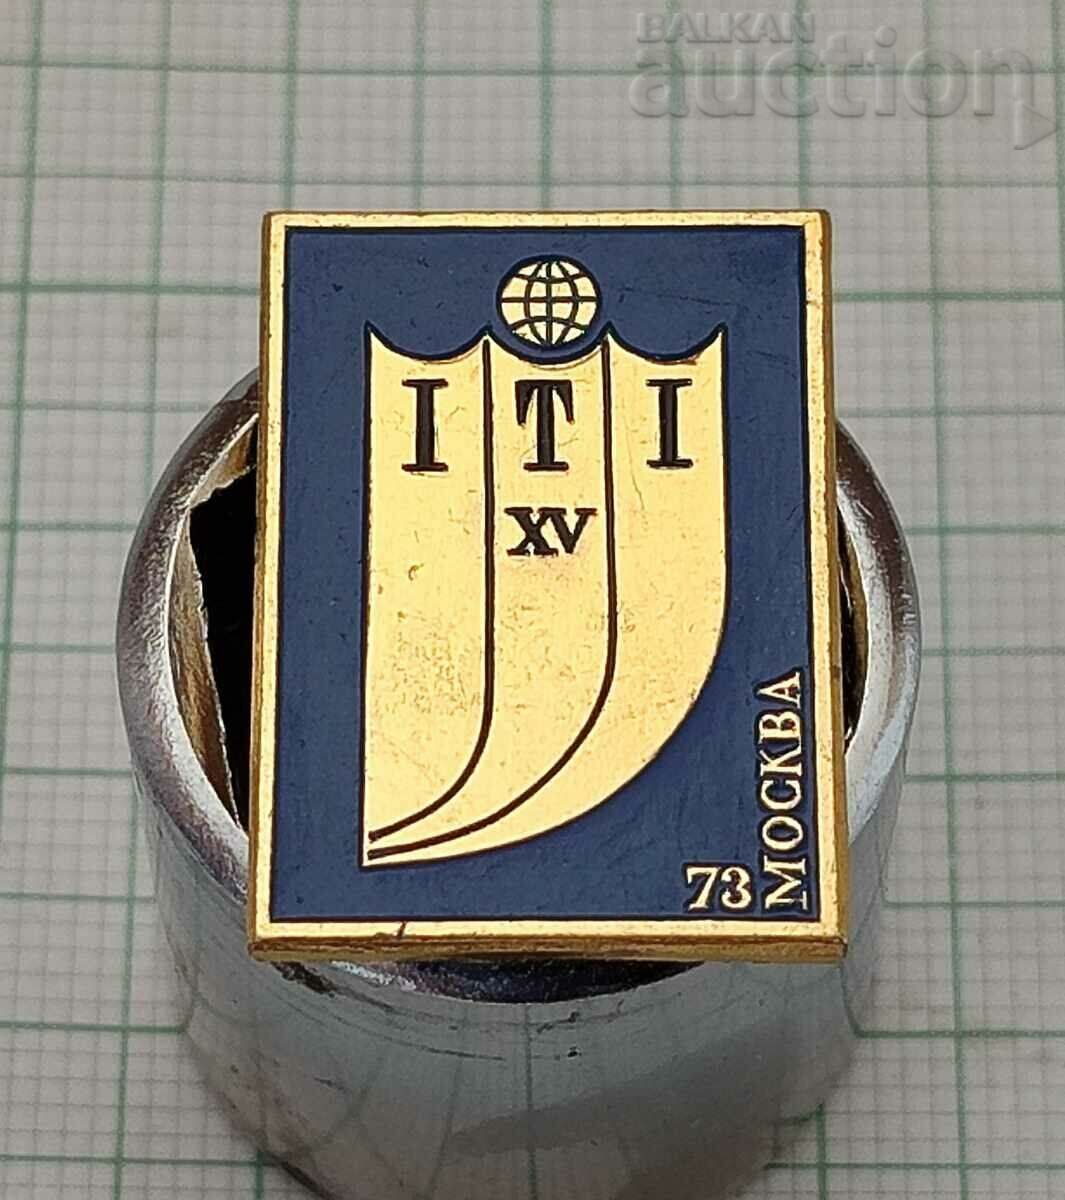 ITI MOSCOW 1973 USSR BADGE